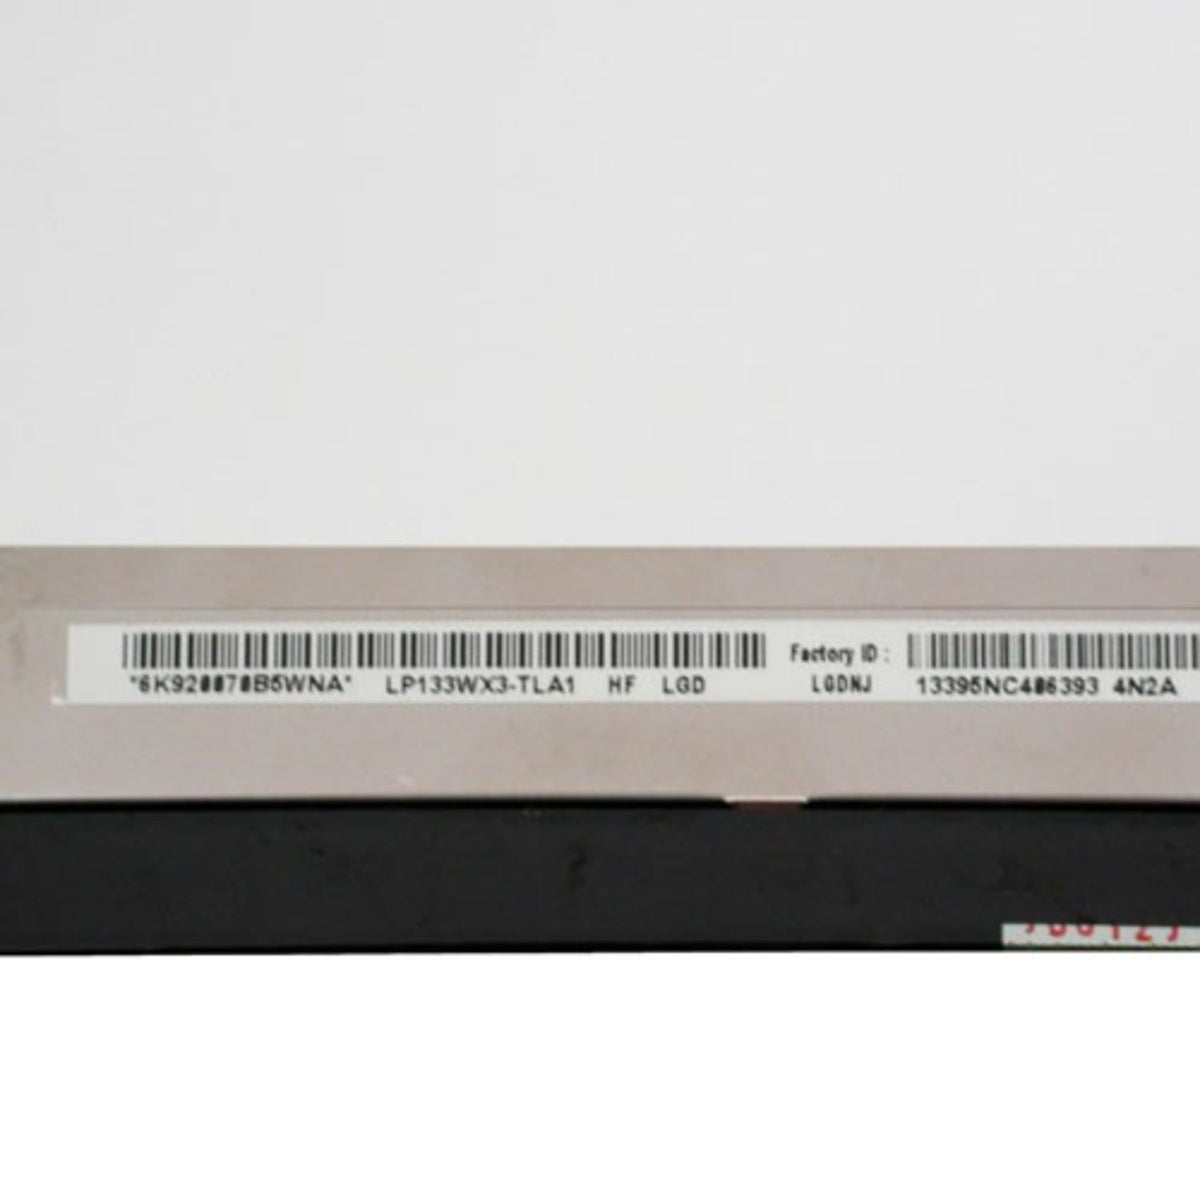 New & Genuine LCD Screen of A1278 For Apple MacBook Unibody 13"  LP133WX3-TLA1 LATE 2008-MID 2012